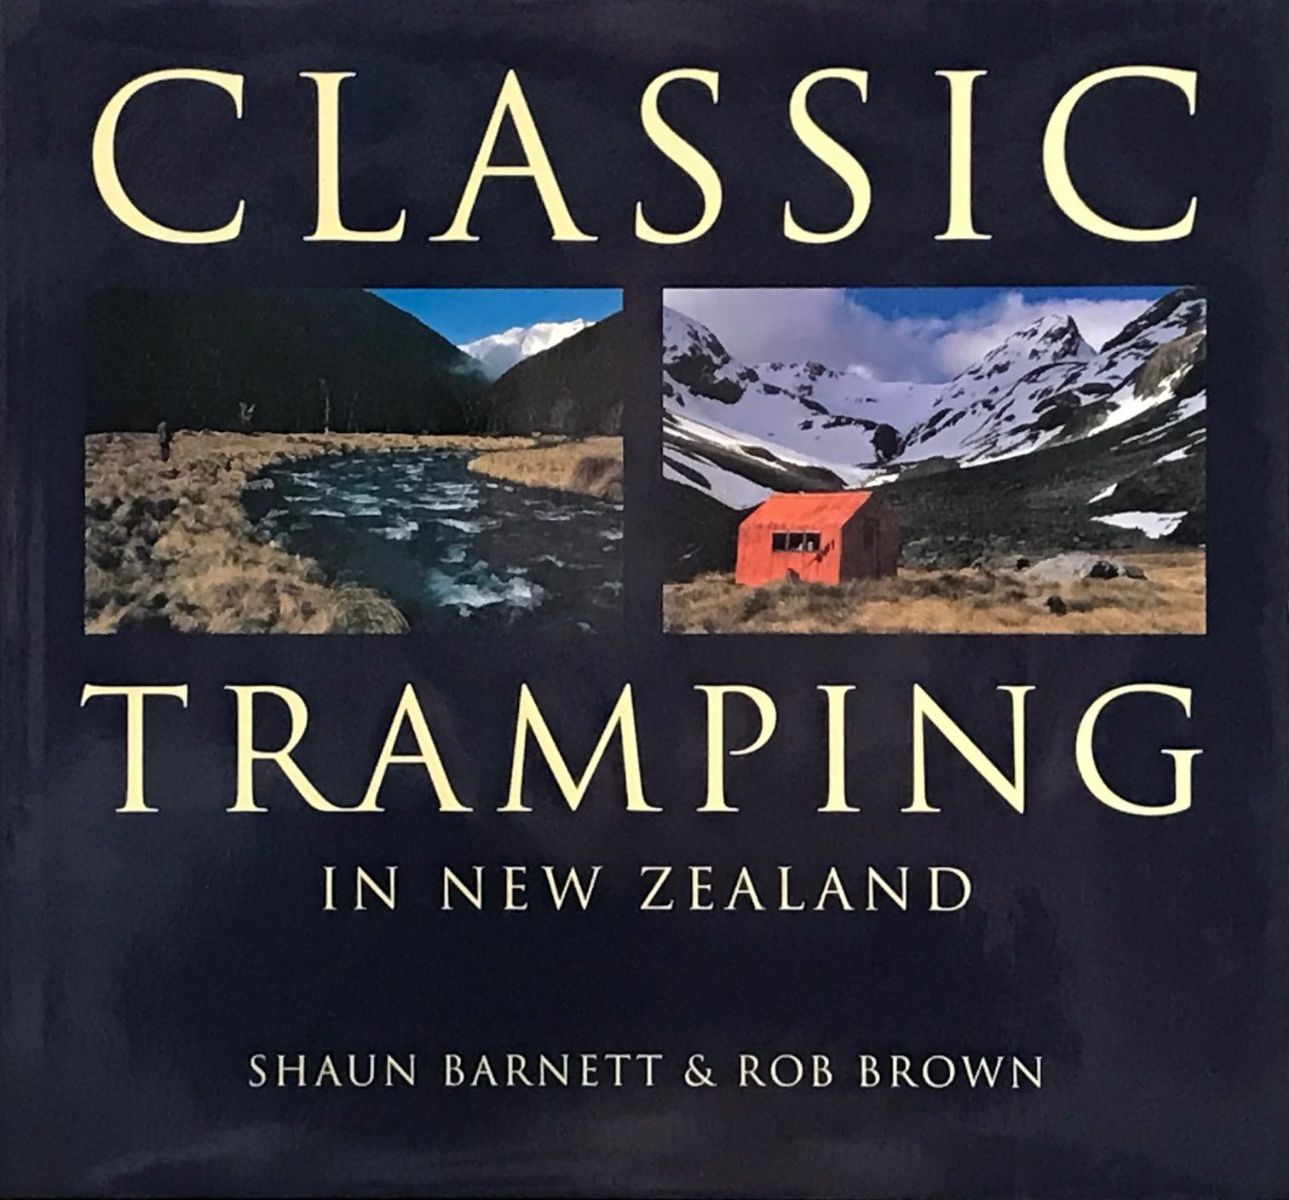 CLASSIC TRAMPING IN NEW ZEALAND